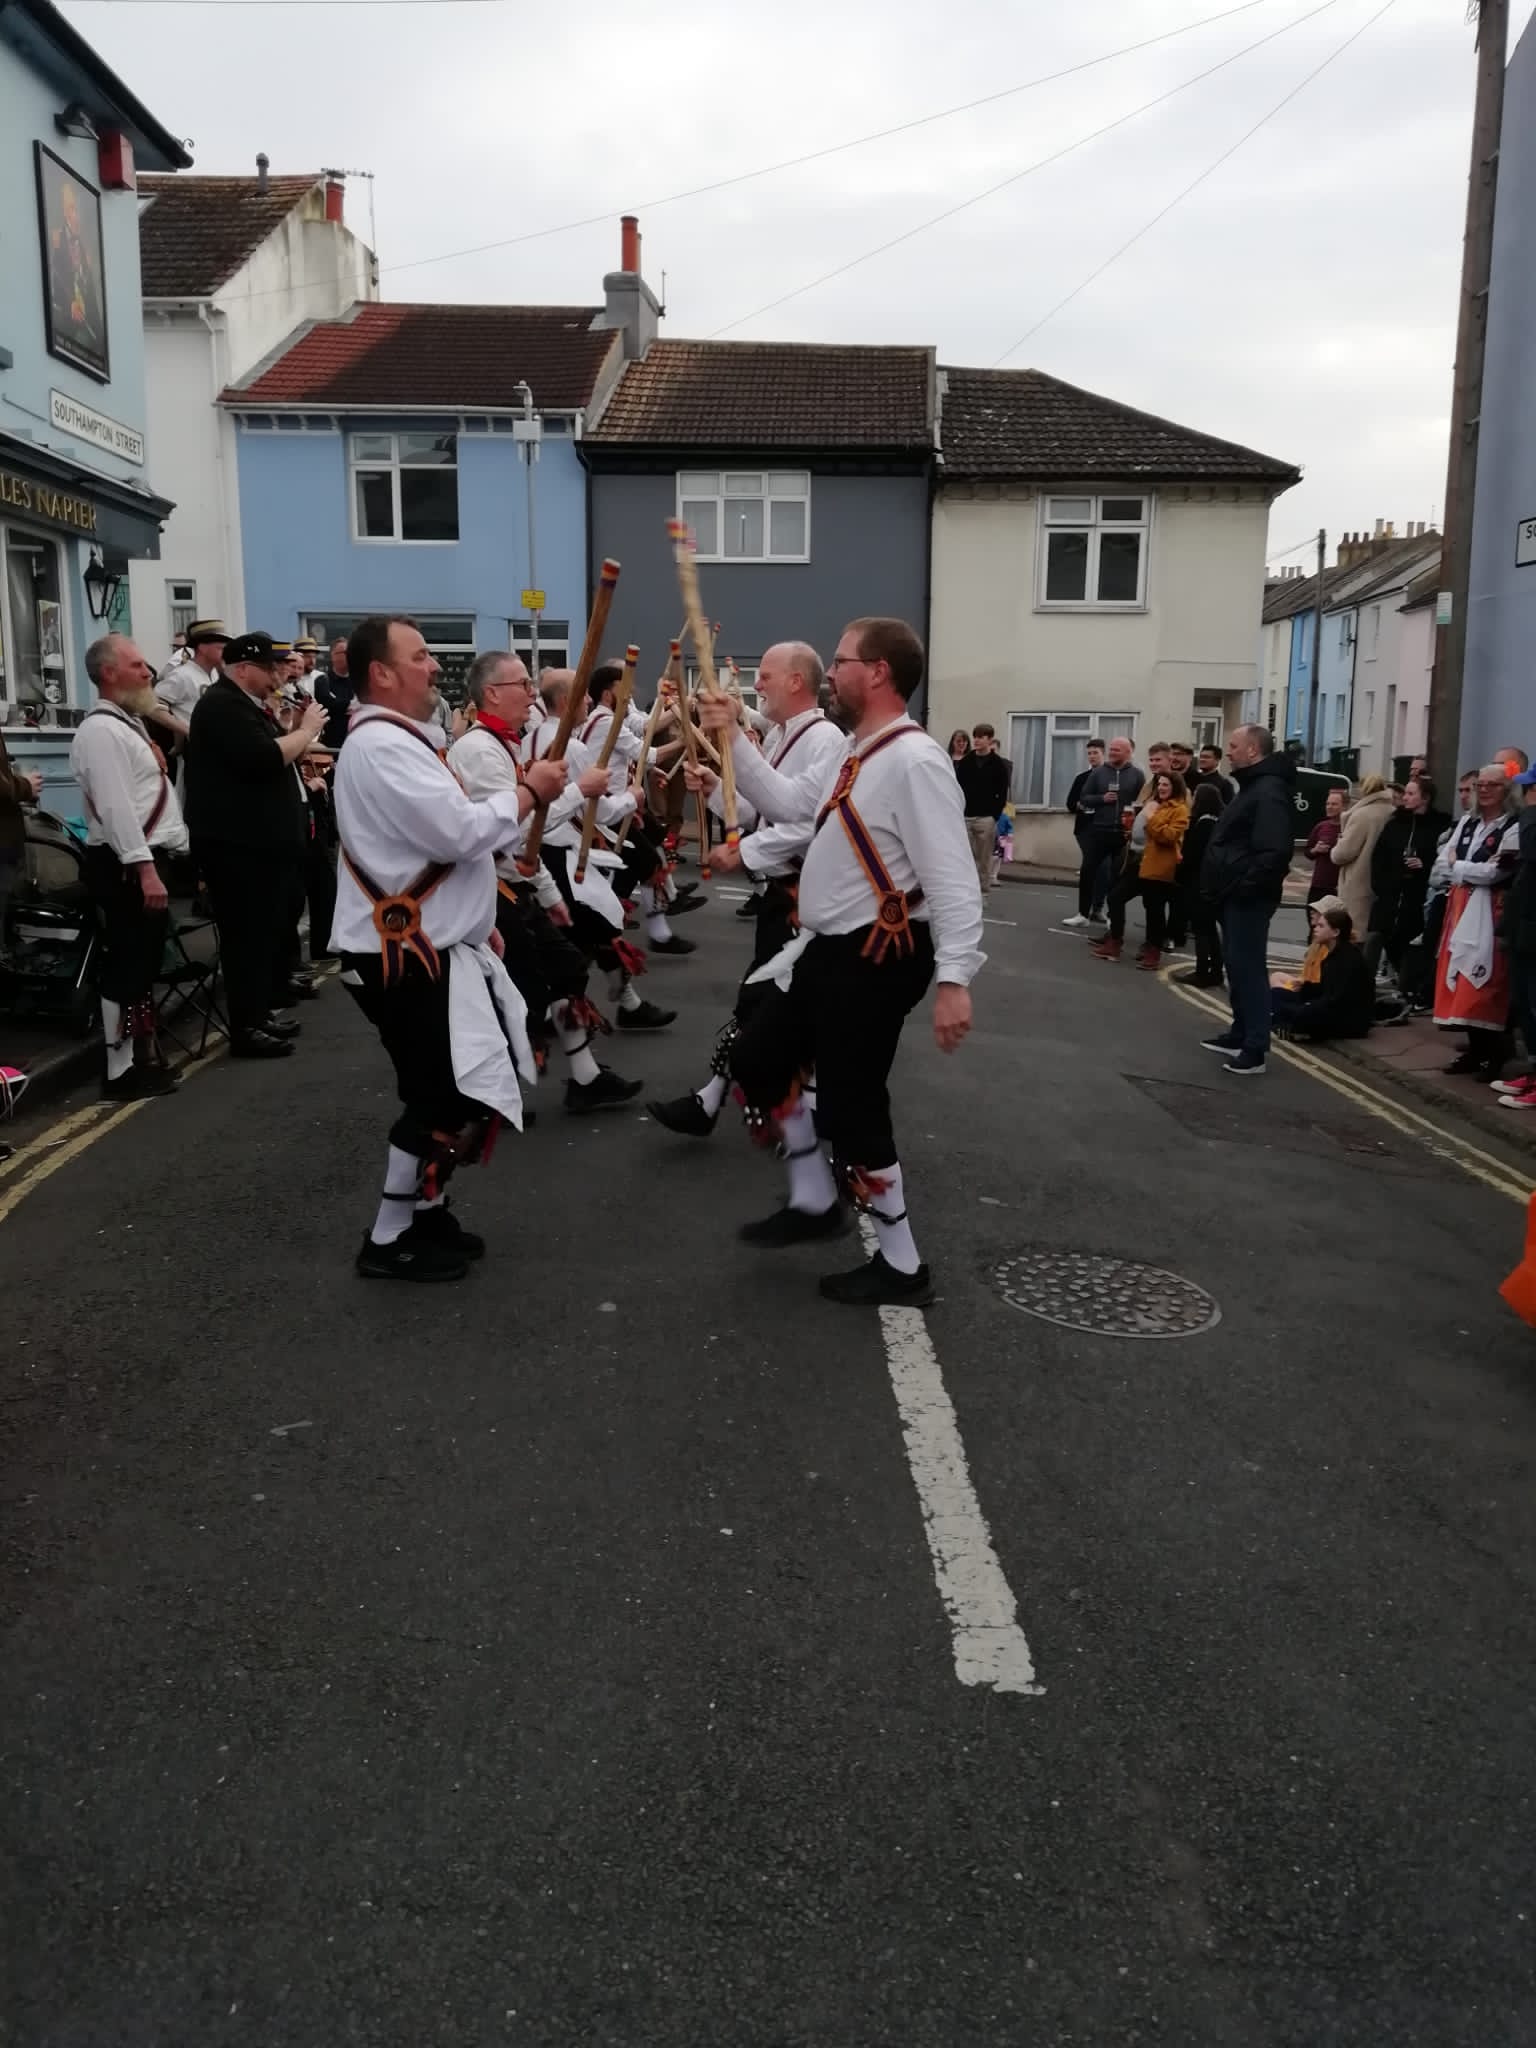 Two sides up for a Bledington stick dance. The Sir Charles Napier, 30th April May Eve.